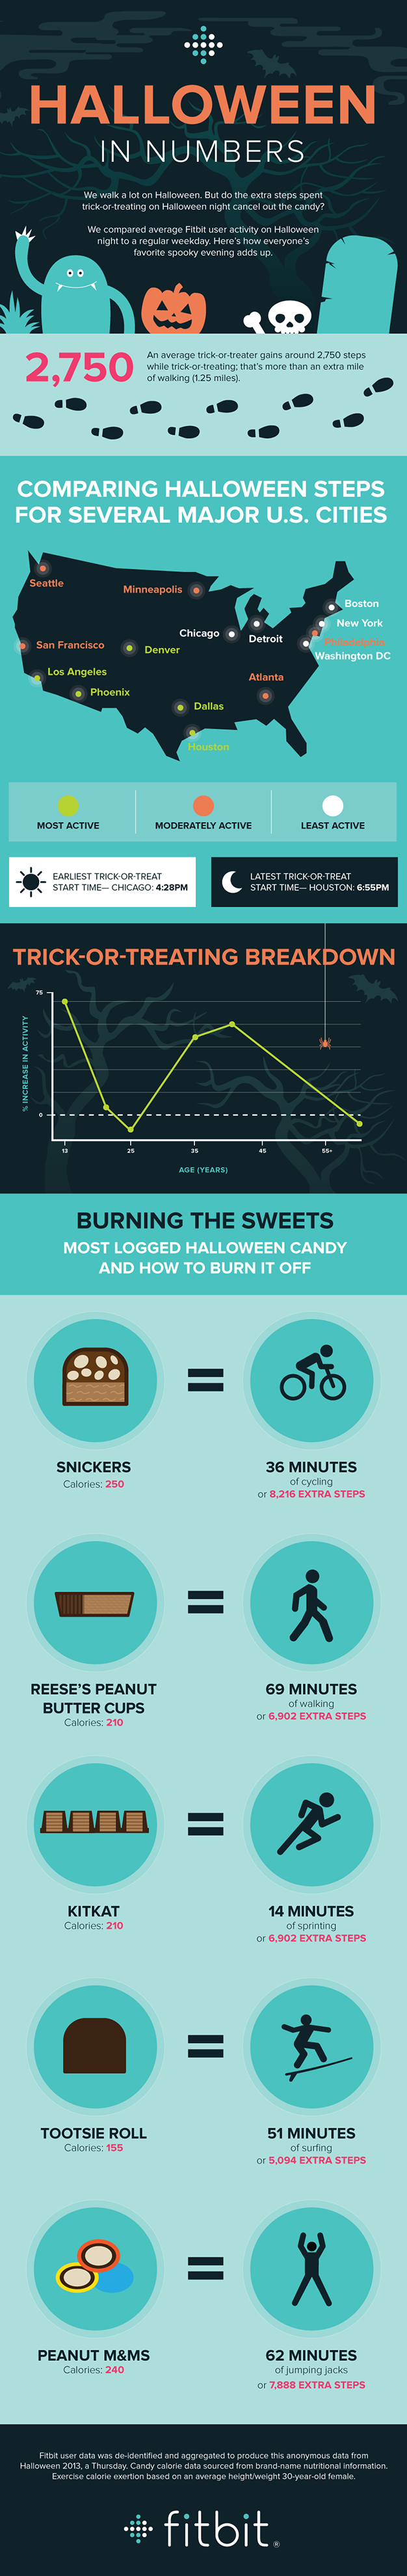 how-can-you-burn-calories-during-halloween